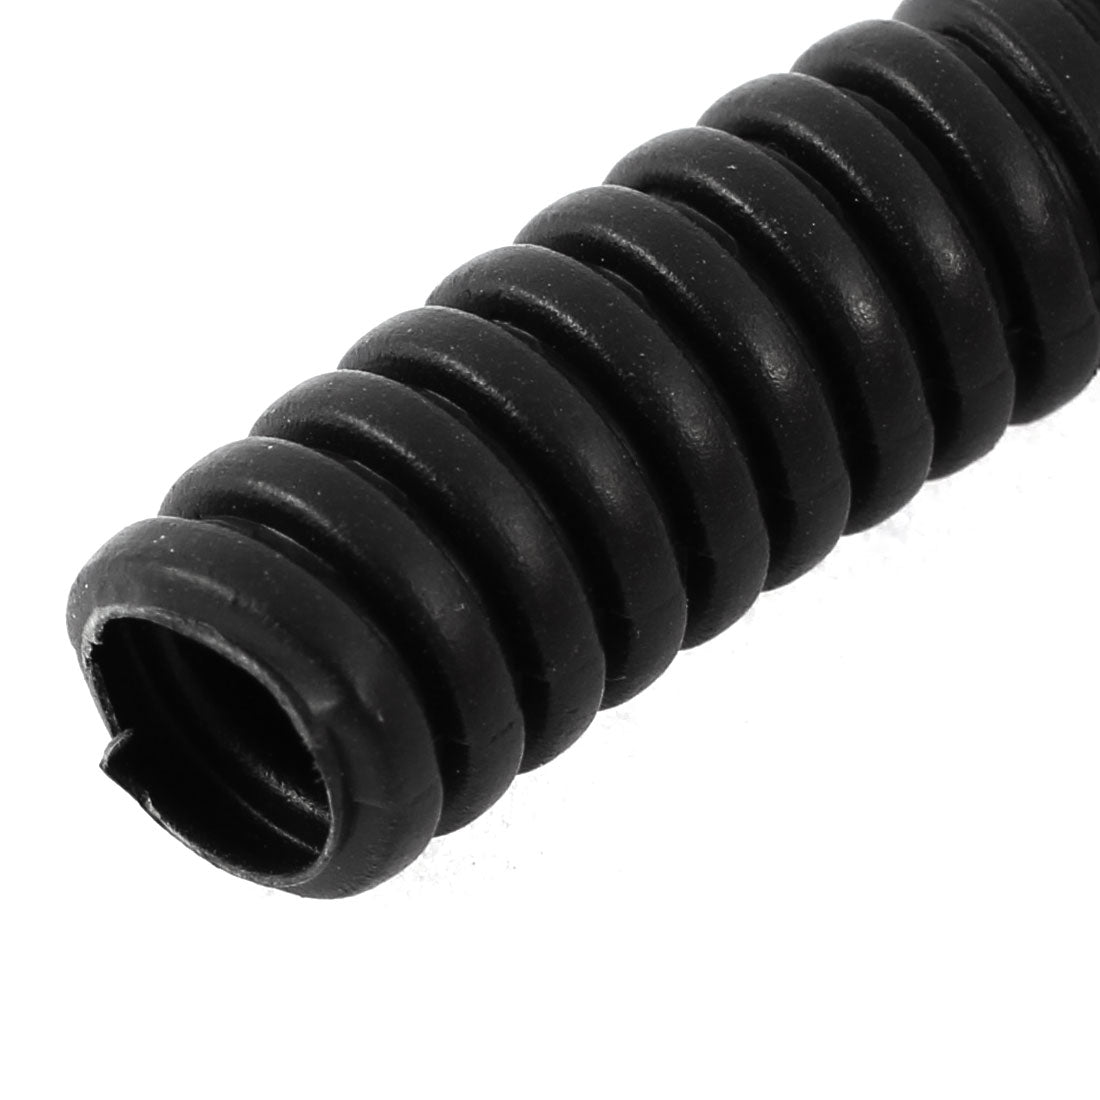 uxcell Uxcell 3.3 M 8 x 10 mm Plastic Flexible Corrugated Conduit Tube for Garden,Office Black